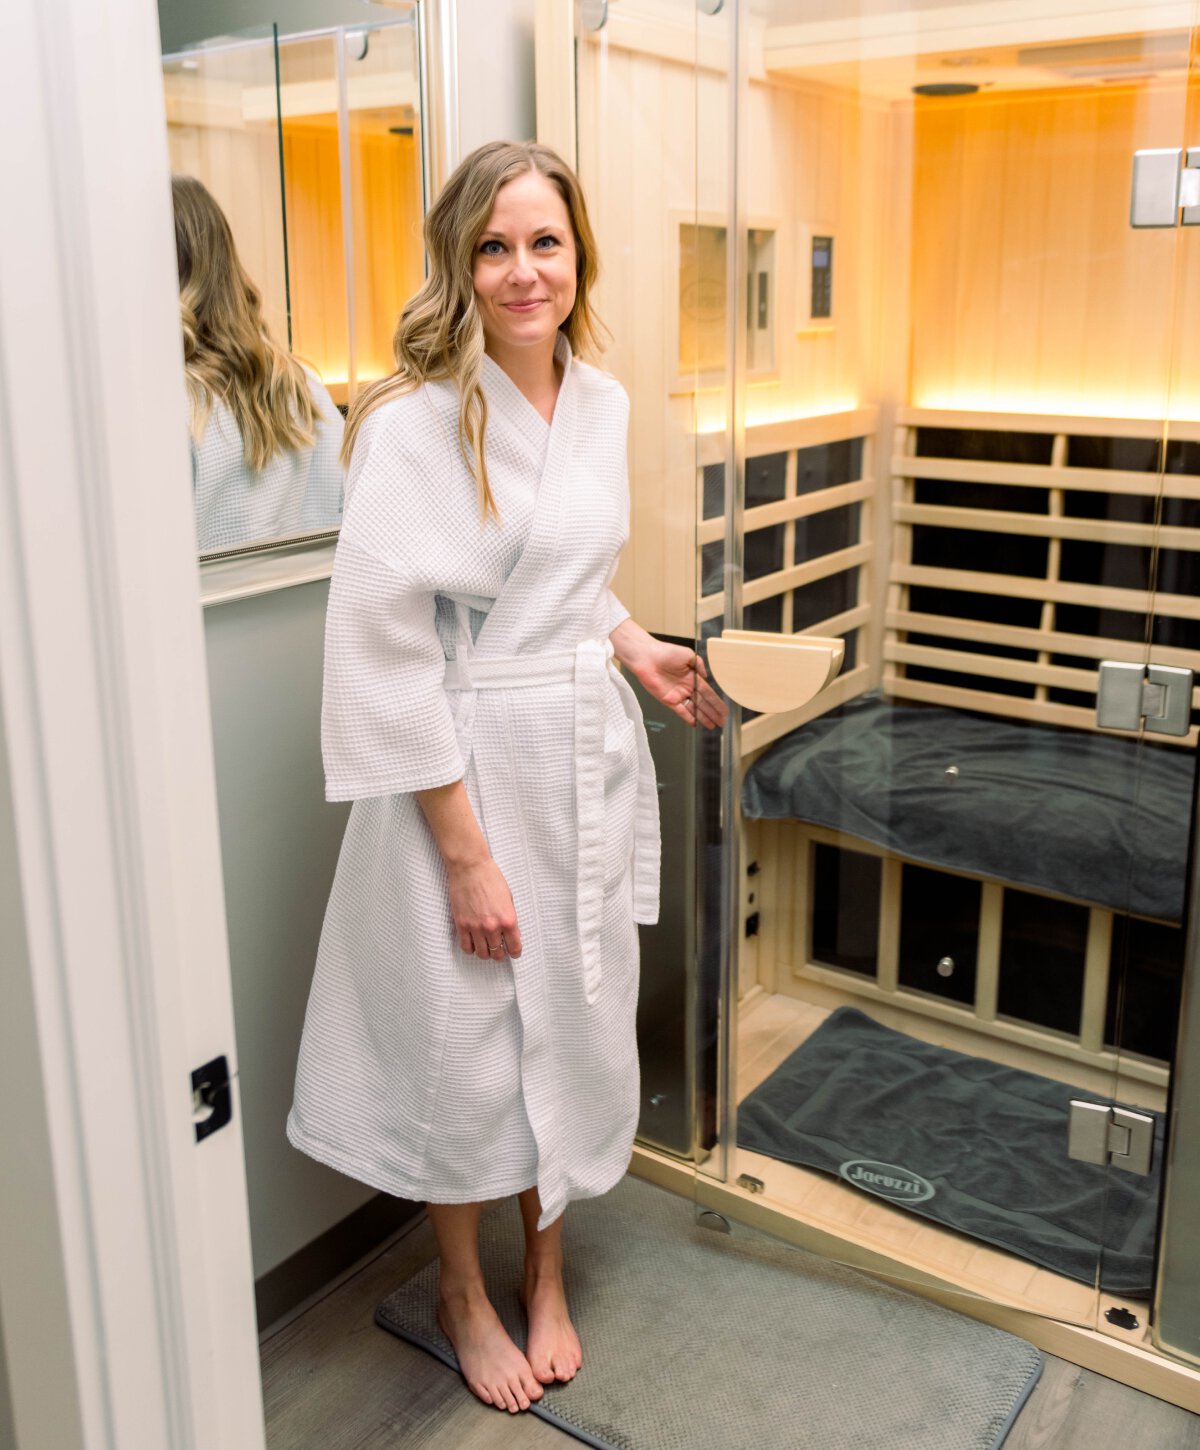 Carmel infrared sauna therapy model with blonde hair